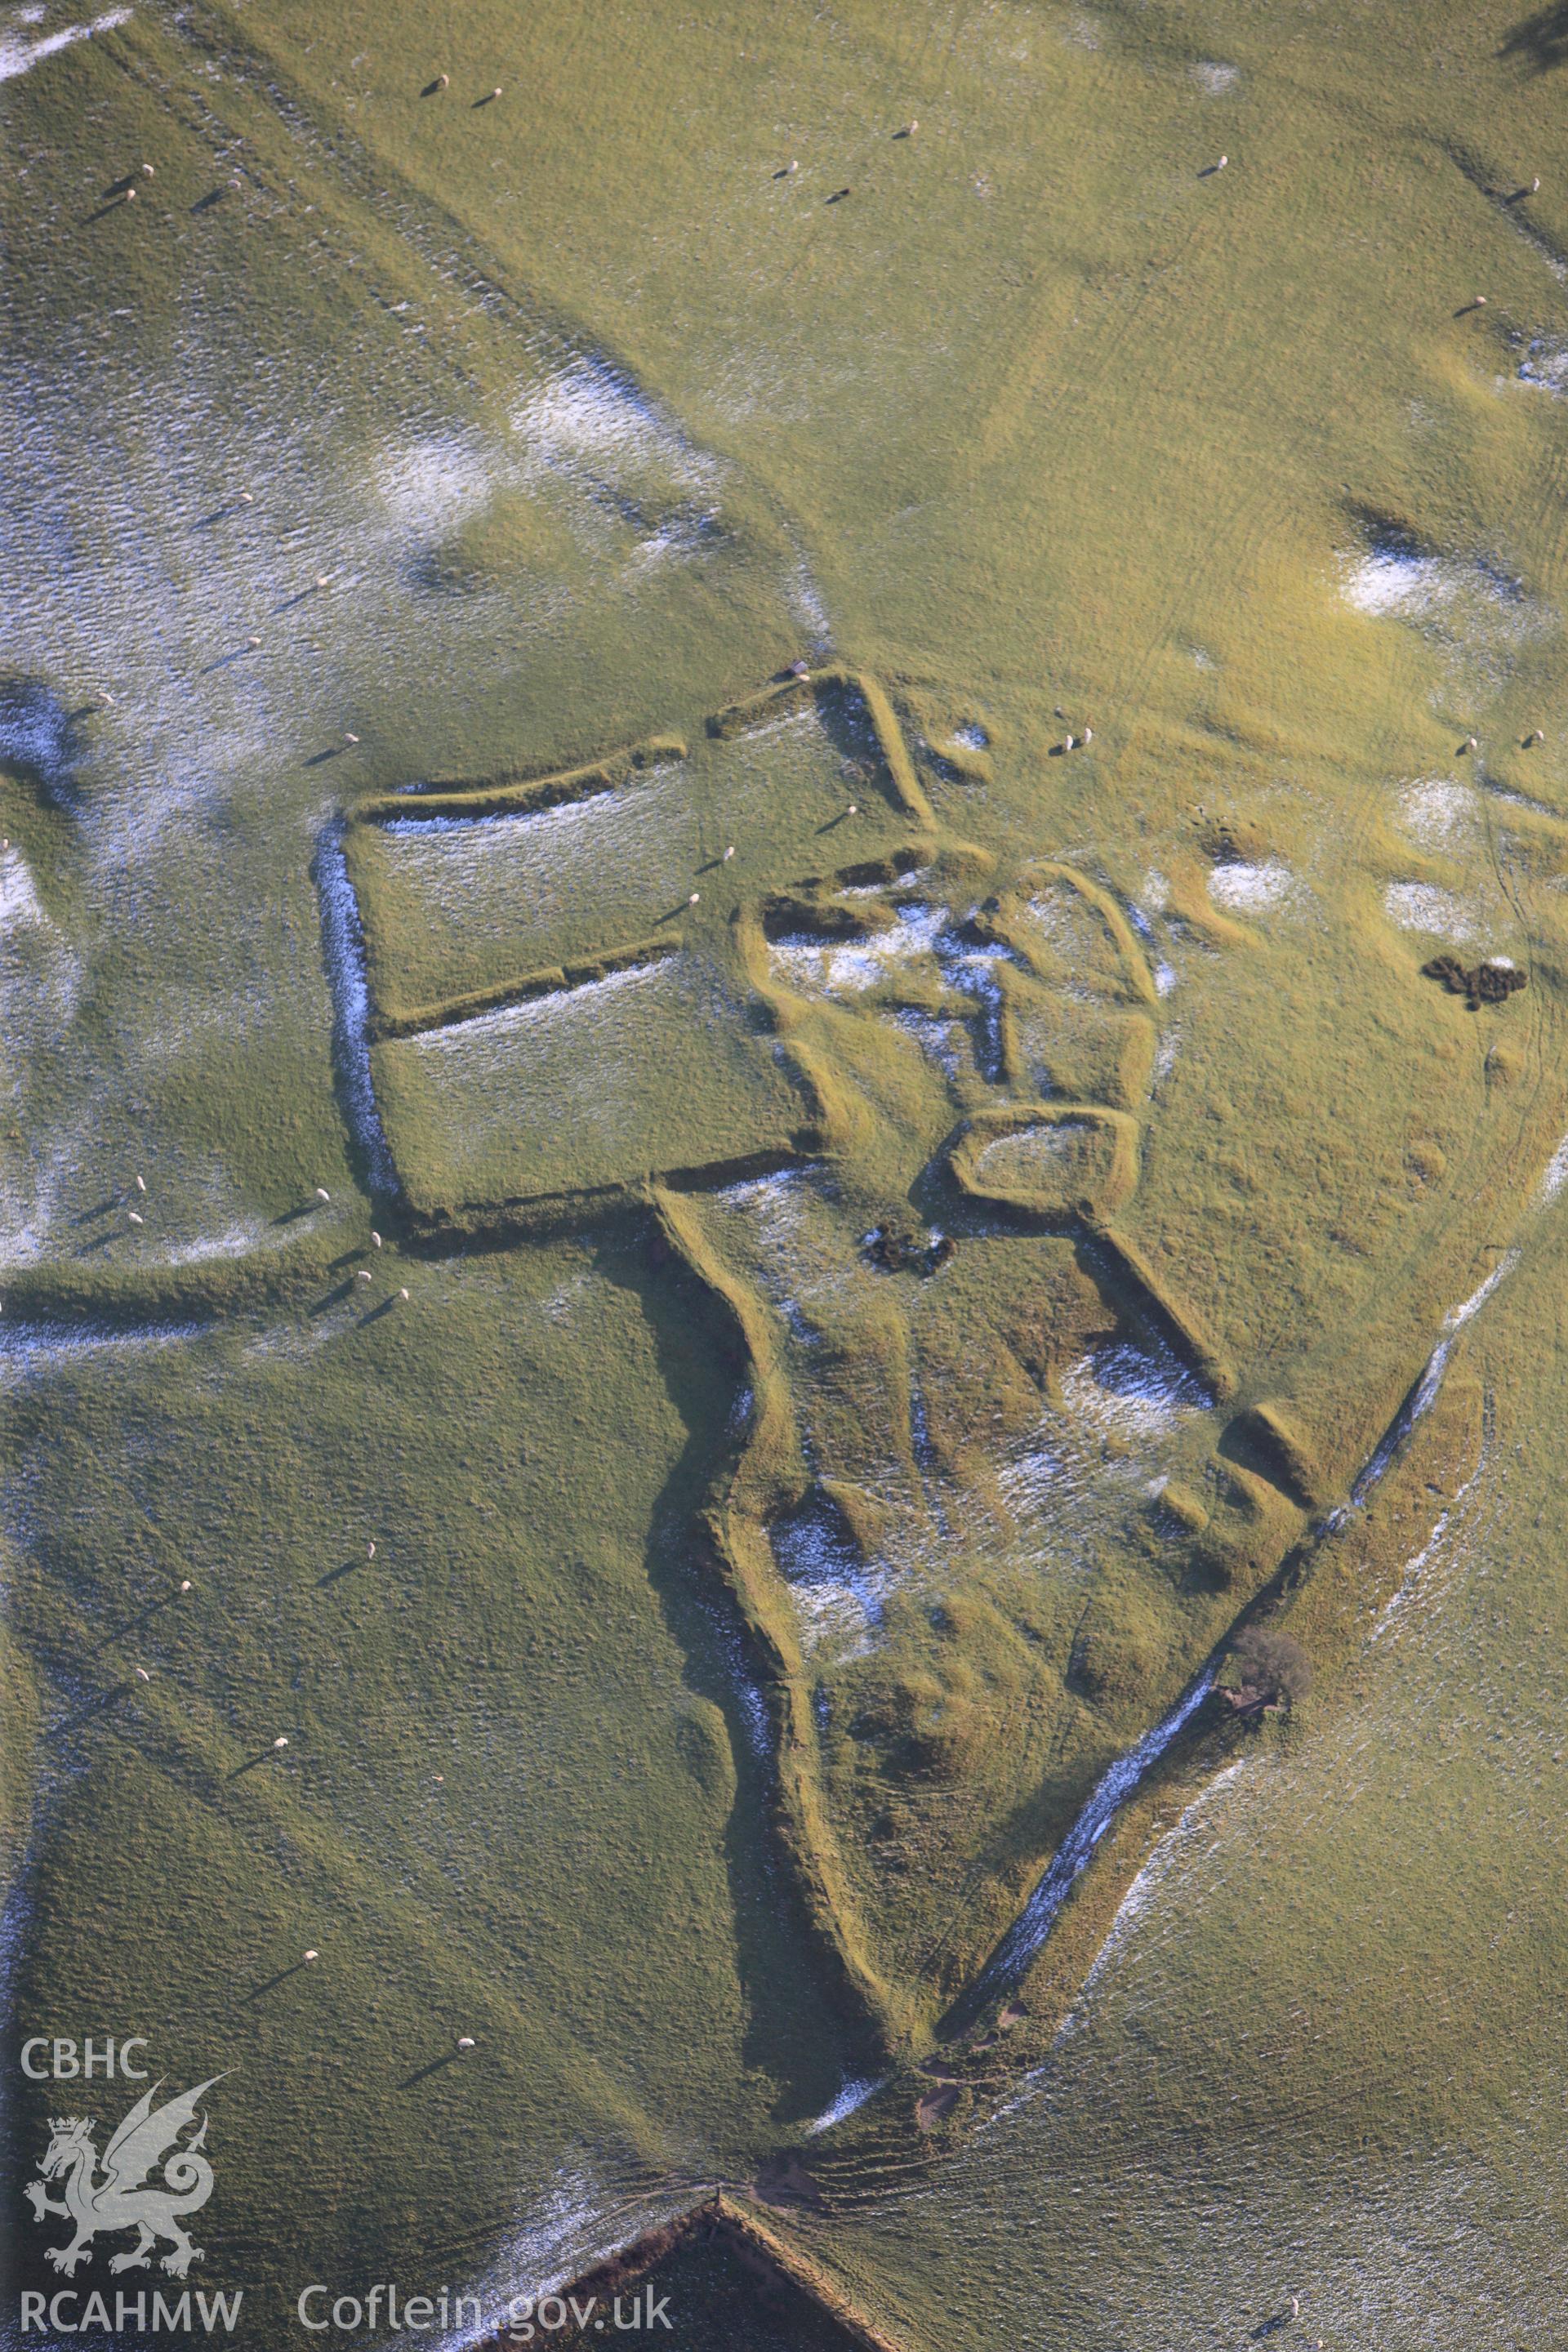 RCAHMW colour oblique photograph of Beili Bedw, settlement complex, under melting snow and low winter light. Reproduced in Driver & Davis (2012) Historic Wales from the Air (RCAHMW), Figure 2, Page 2. Taken by Toby Driver on 18/12/2011.